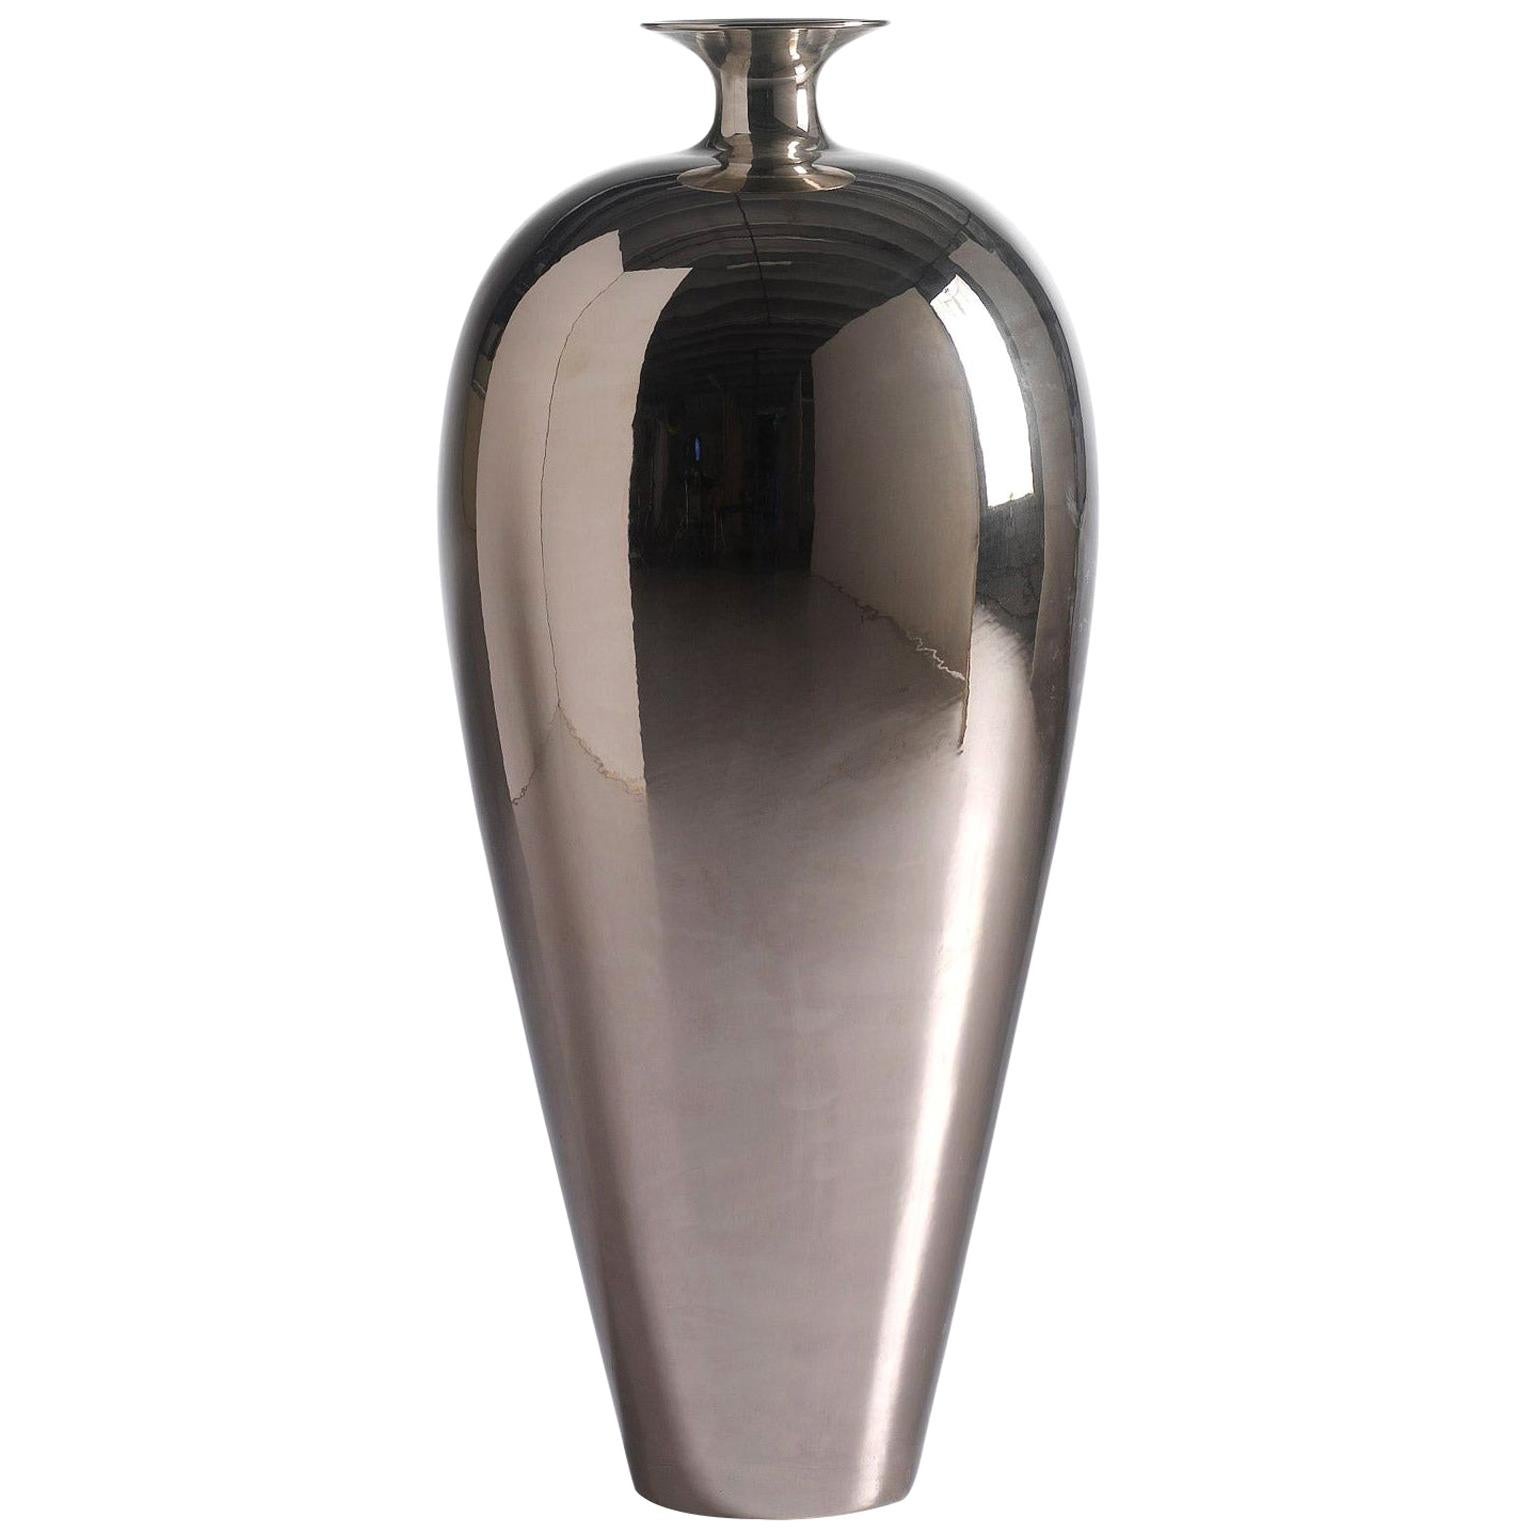 Ceramic Vase "DOLLY" Handcrafted in Platinum by Gabriella B. Made in Italy